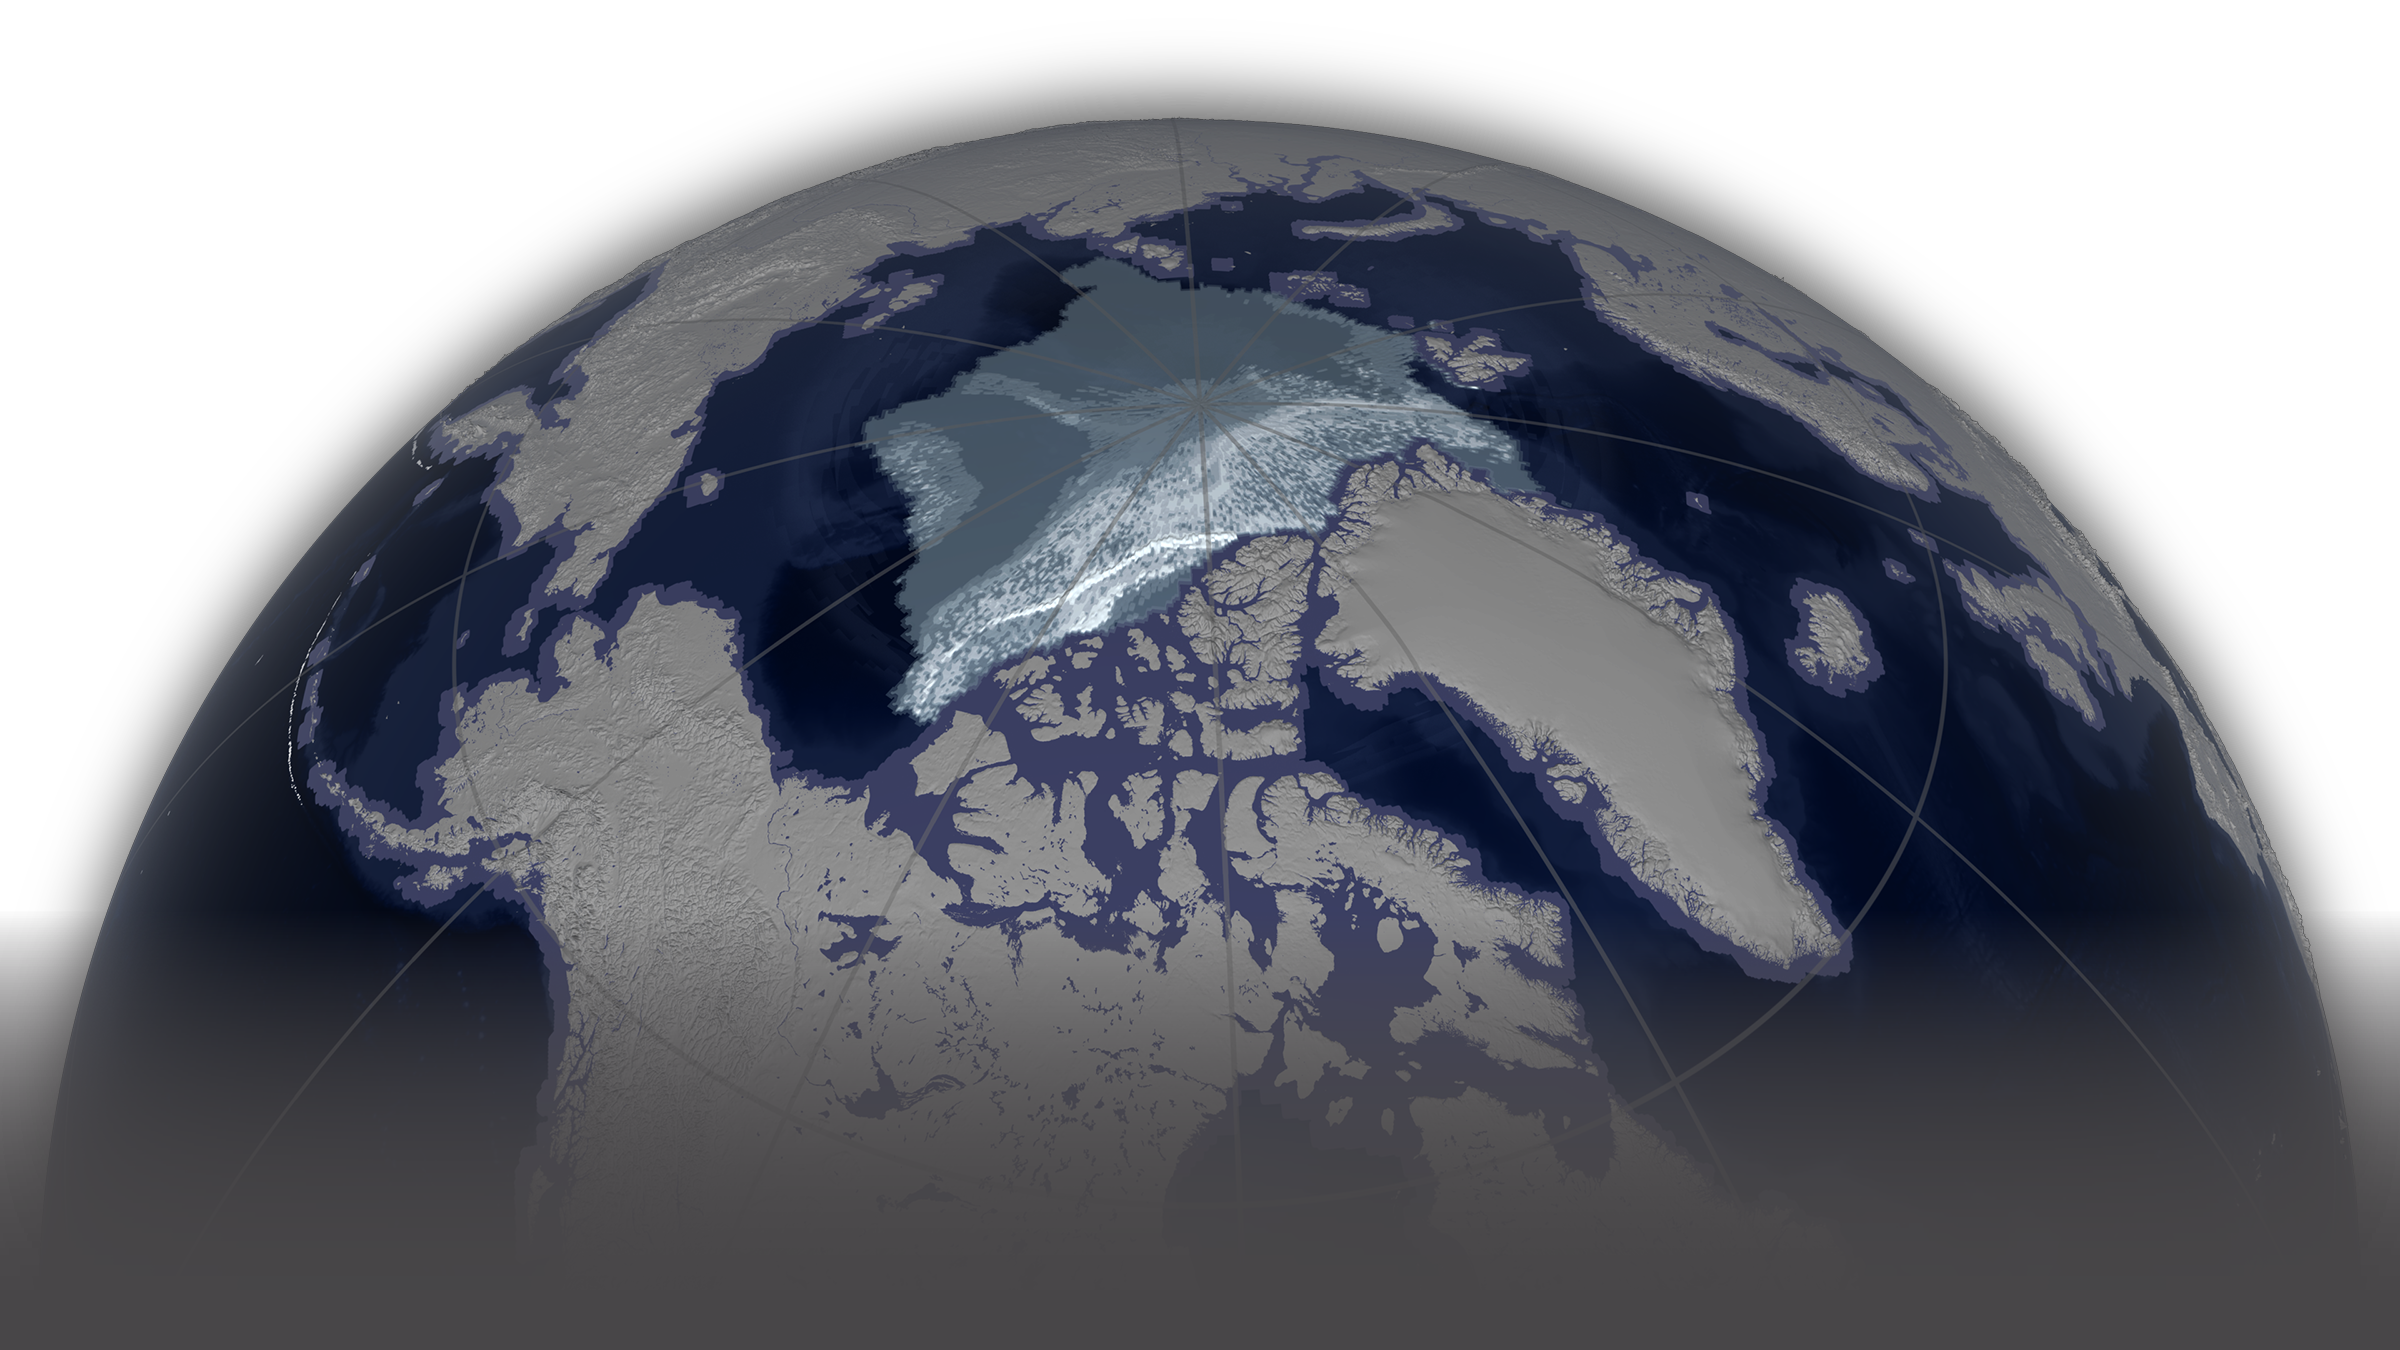 Arctic sea ice may melt faster in coming years due to shifting winds